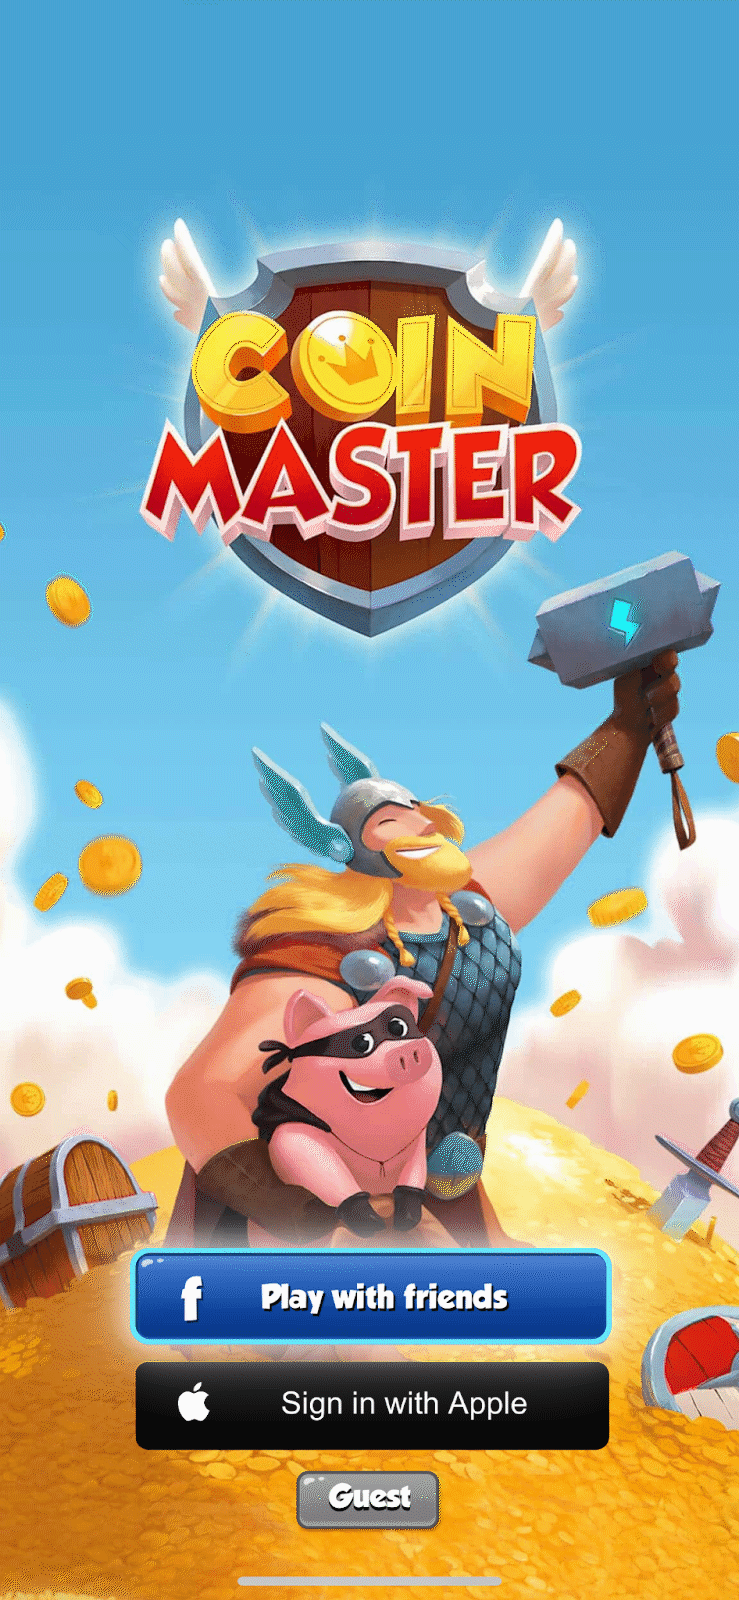 Events on Coin Master - Google Play Community